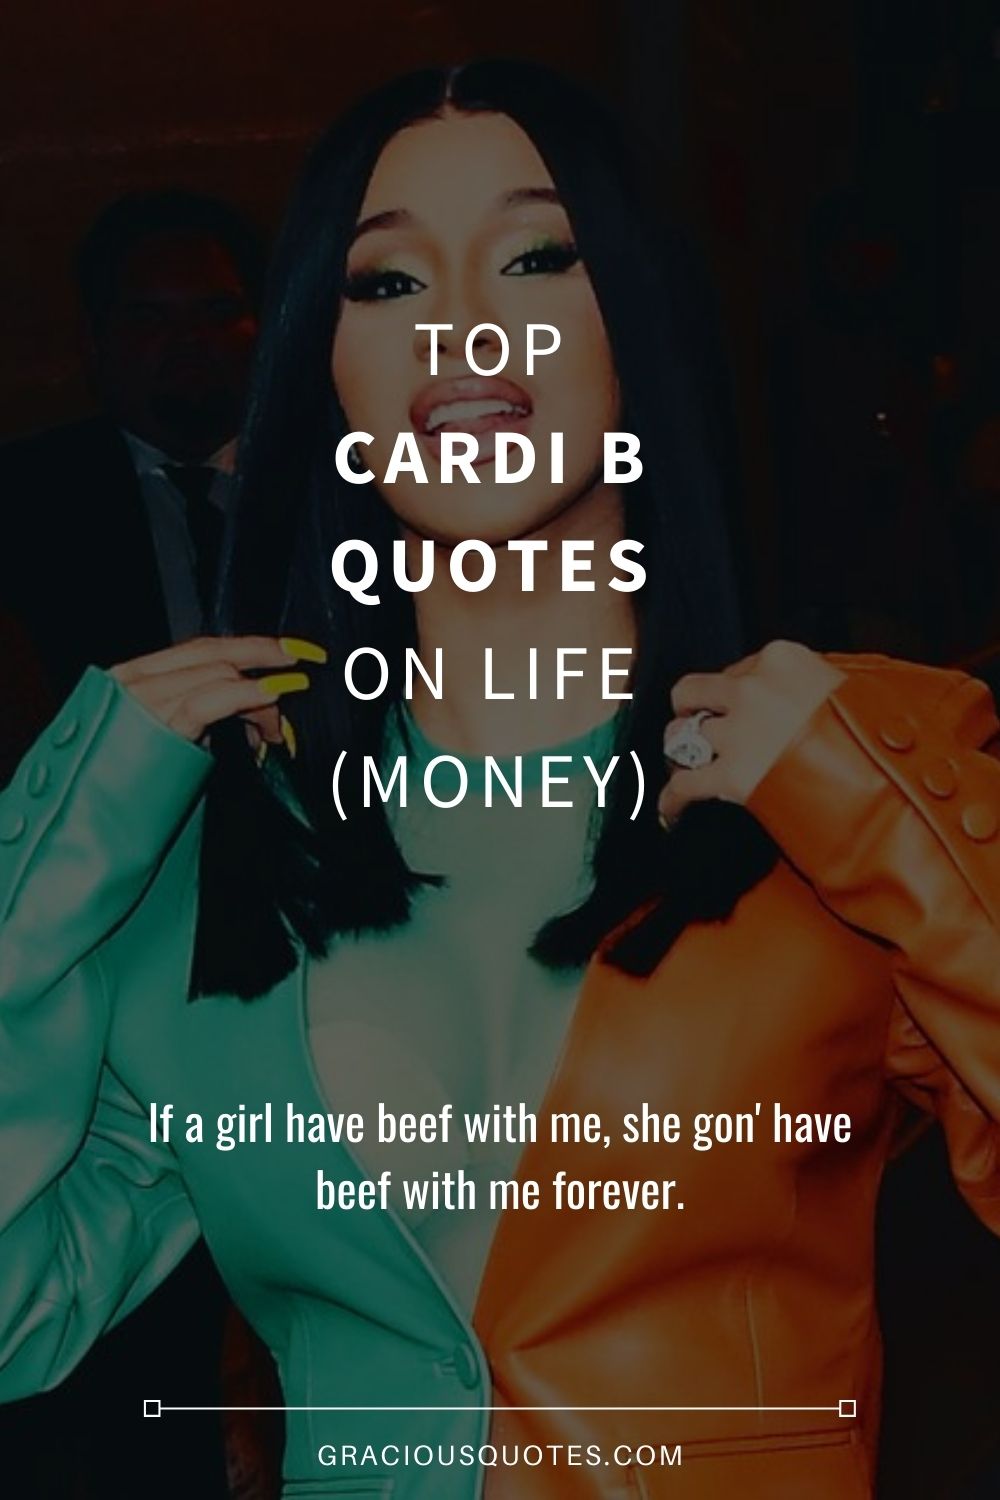 Top Cardi B Quotes on Life (MONEY) - Gracious Quotes